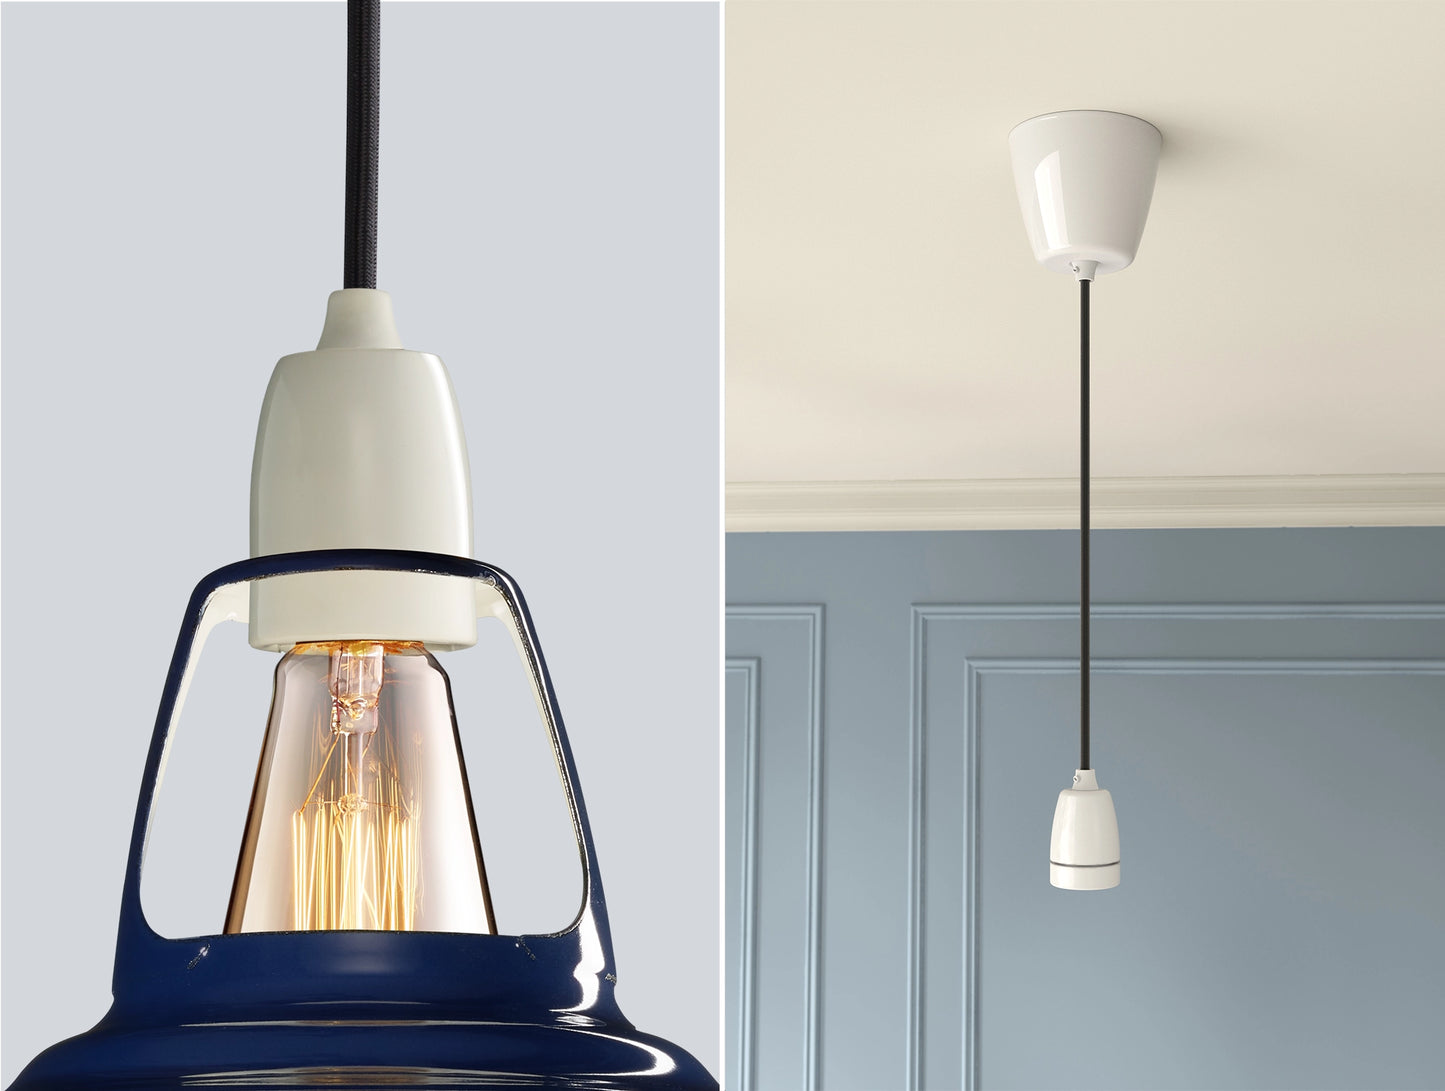 Close up of an E27 Porcelain suspension set on a Piccadilly Line Blue lampshade on the left. On the right, an E27 Porcelain pendant set is hanging from the ceiling